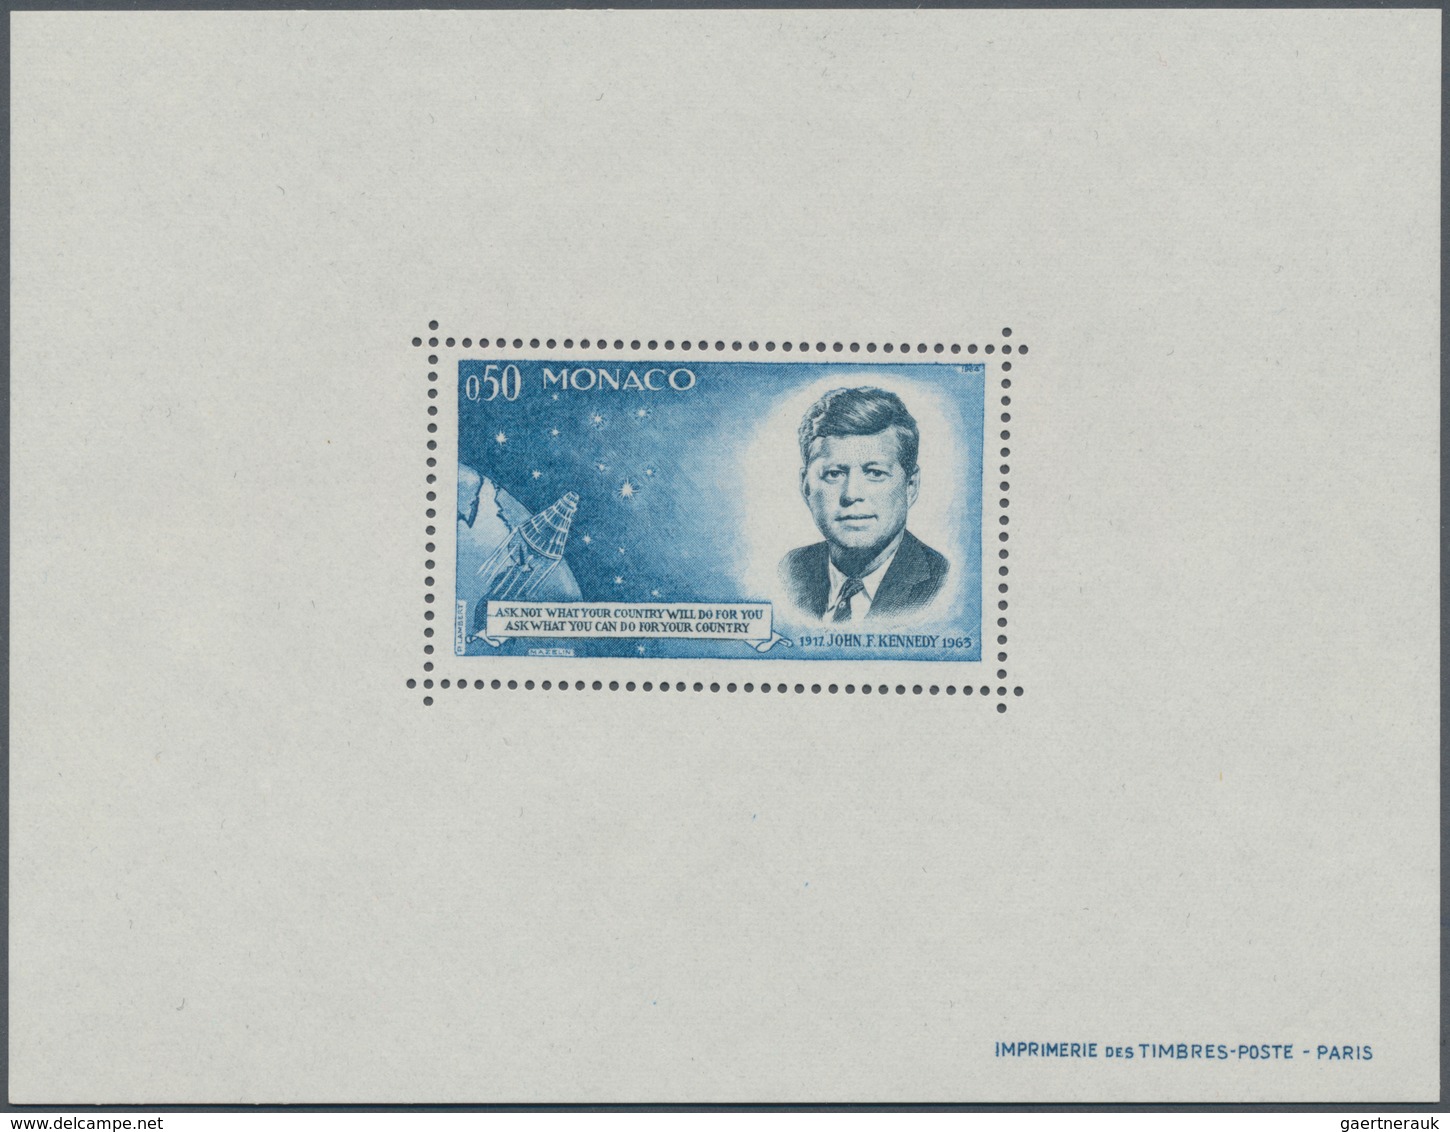 Monaco: 1964, One Year Death Of J.F. Kennedy Special Perforated Miniature Sheet, Mint Never Hinged A - Oblitérés